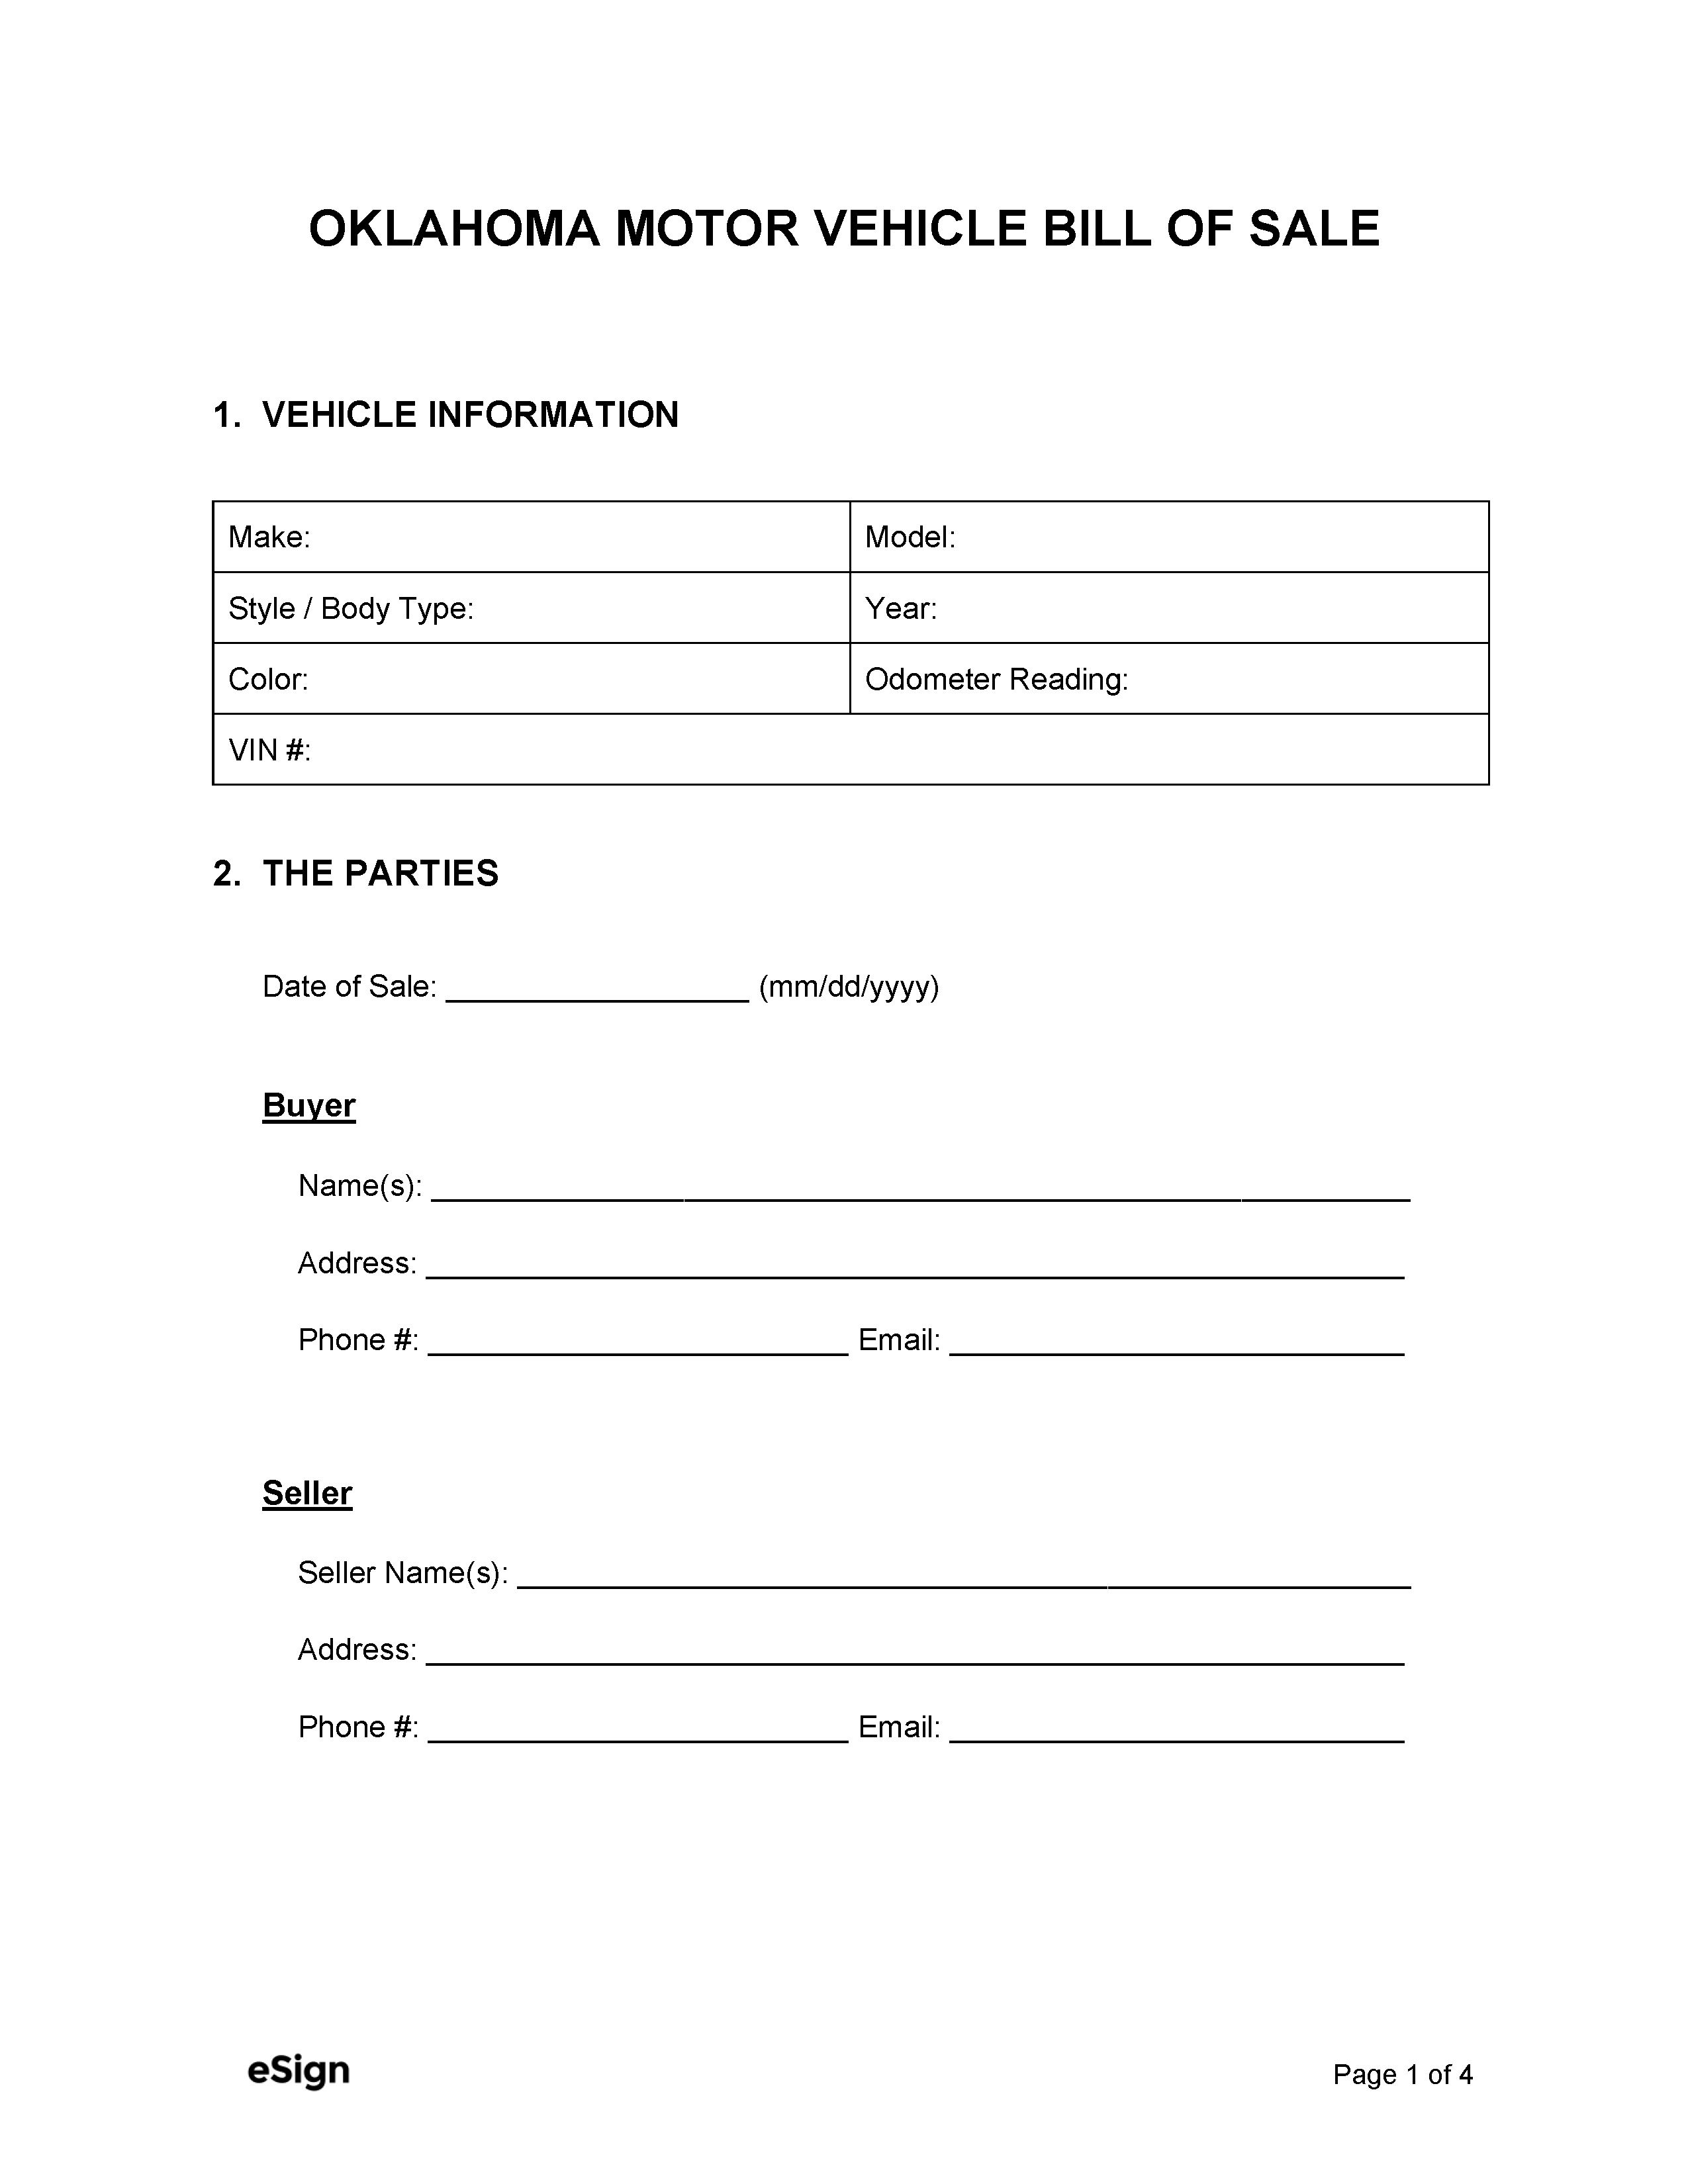 Free Oklahoma Motor Vehicle Bill of Sale Form - PDF  Word Pertaining To Car Bill Of Sale Word Template